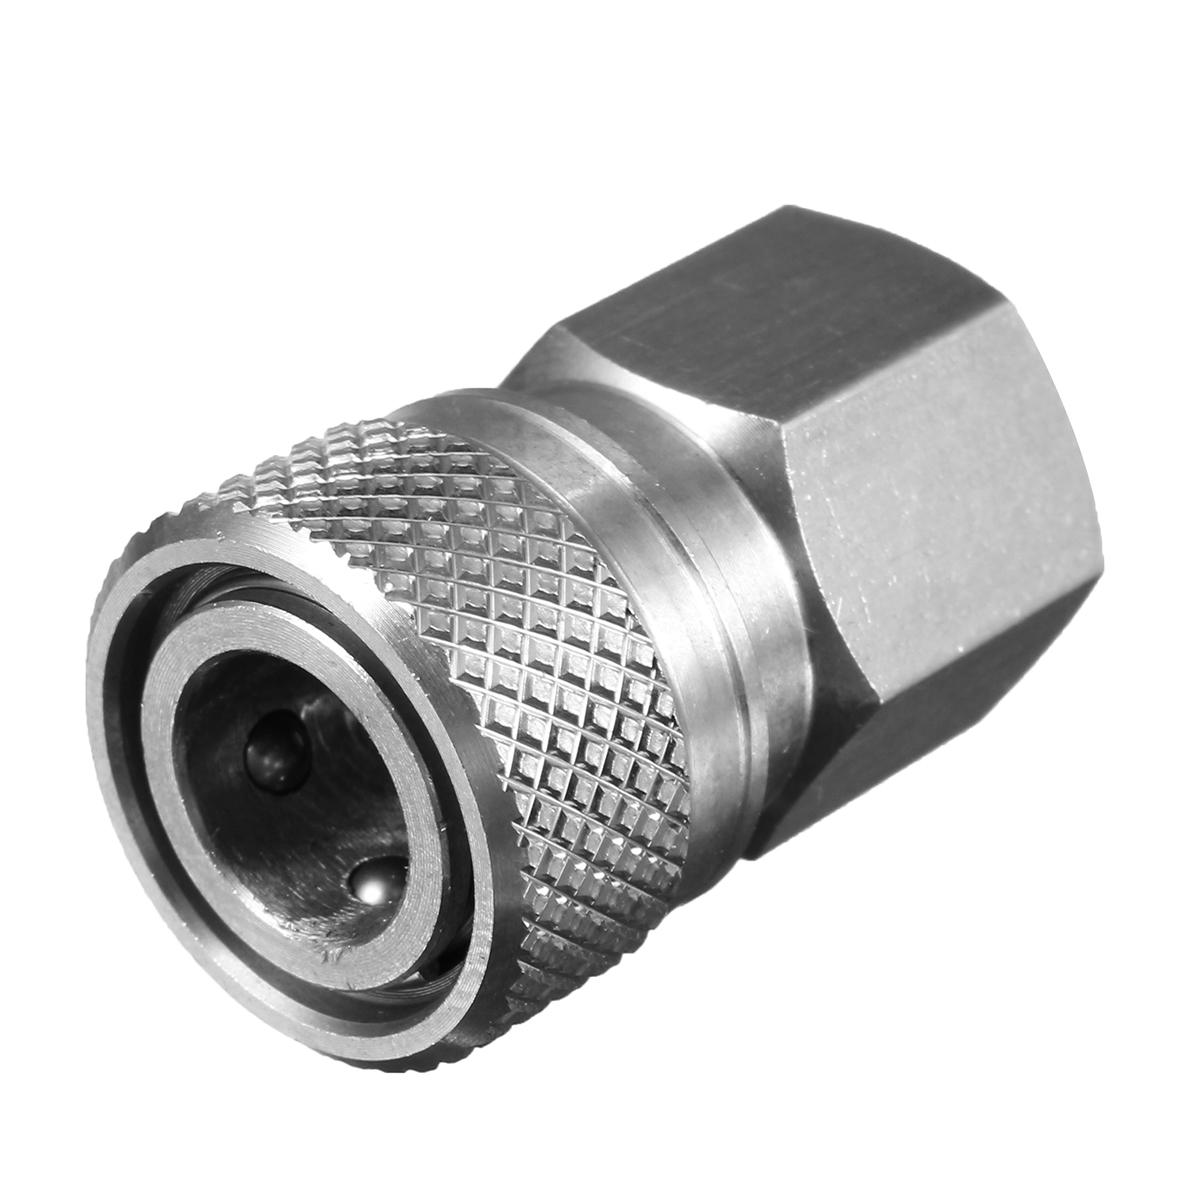 

Paintball PCP 1/8 NPT Stainless Steel Female Connector Quick Disconnect Adapter